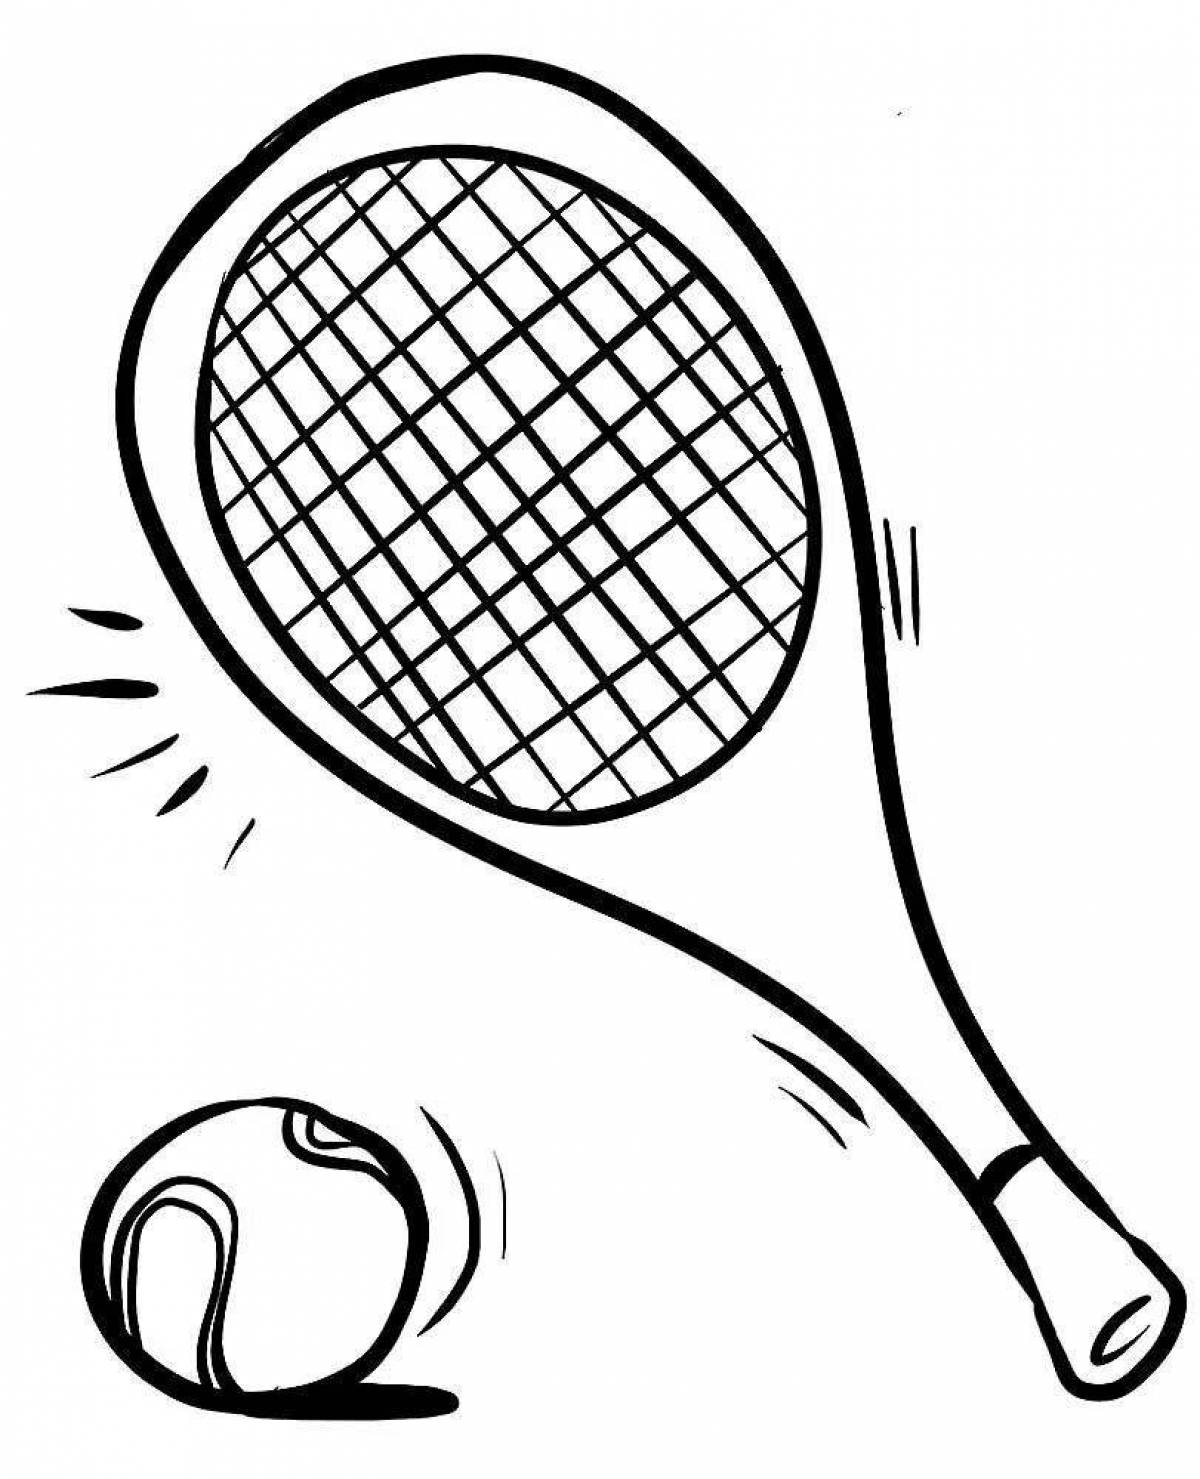 Adorable sports equipment coloring page